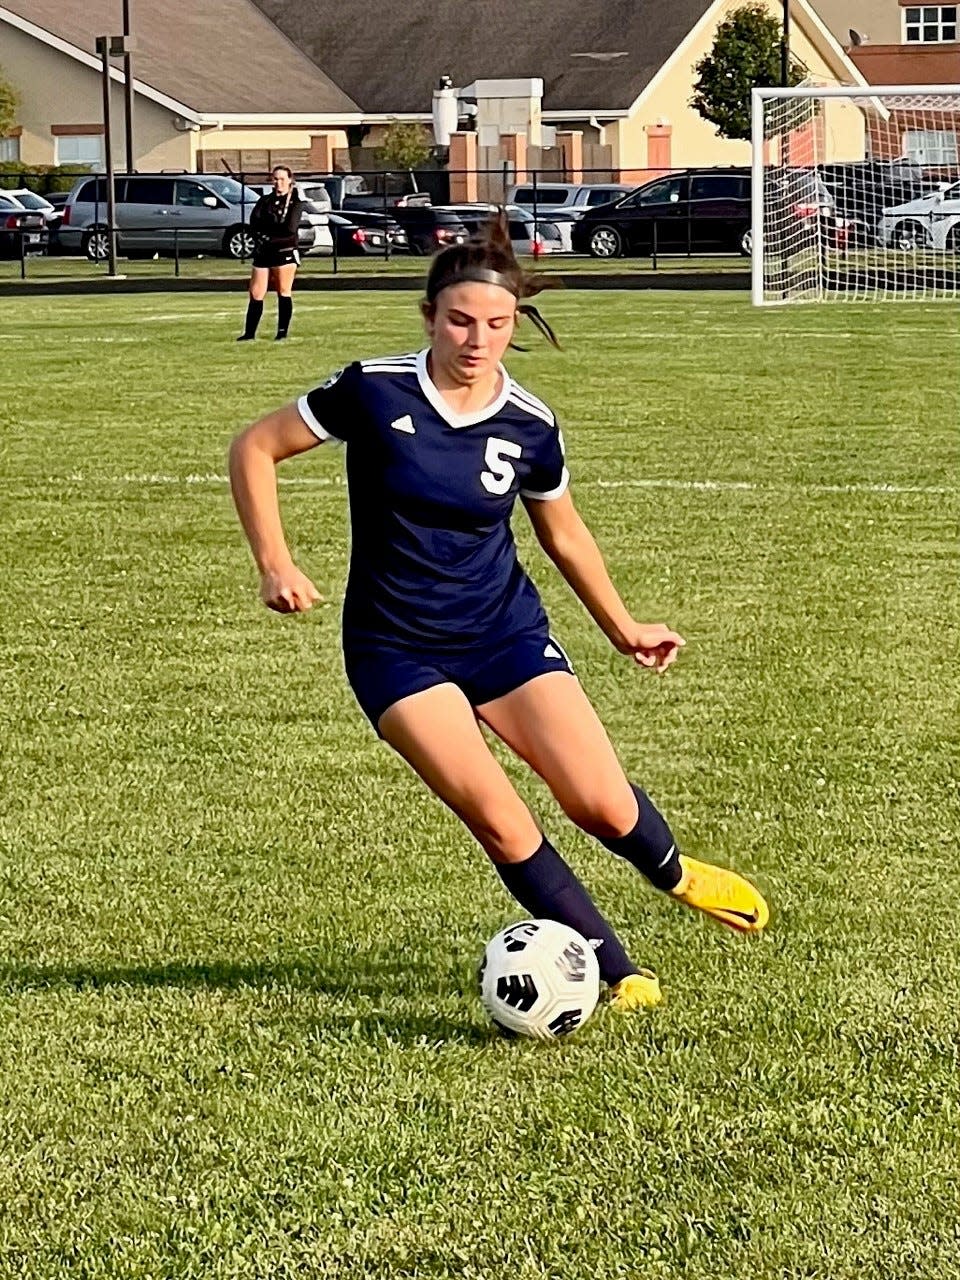 River Valley's Gianna Alves dribbles the ball during a girls soccer match at home against Pleasant last week.